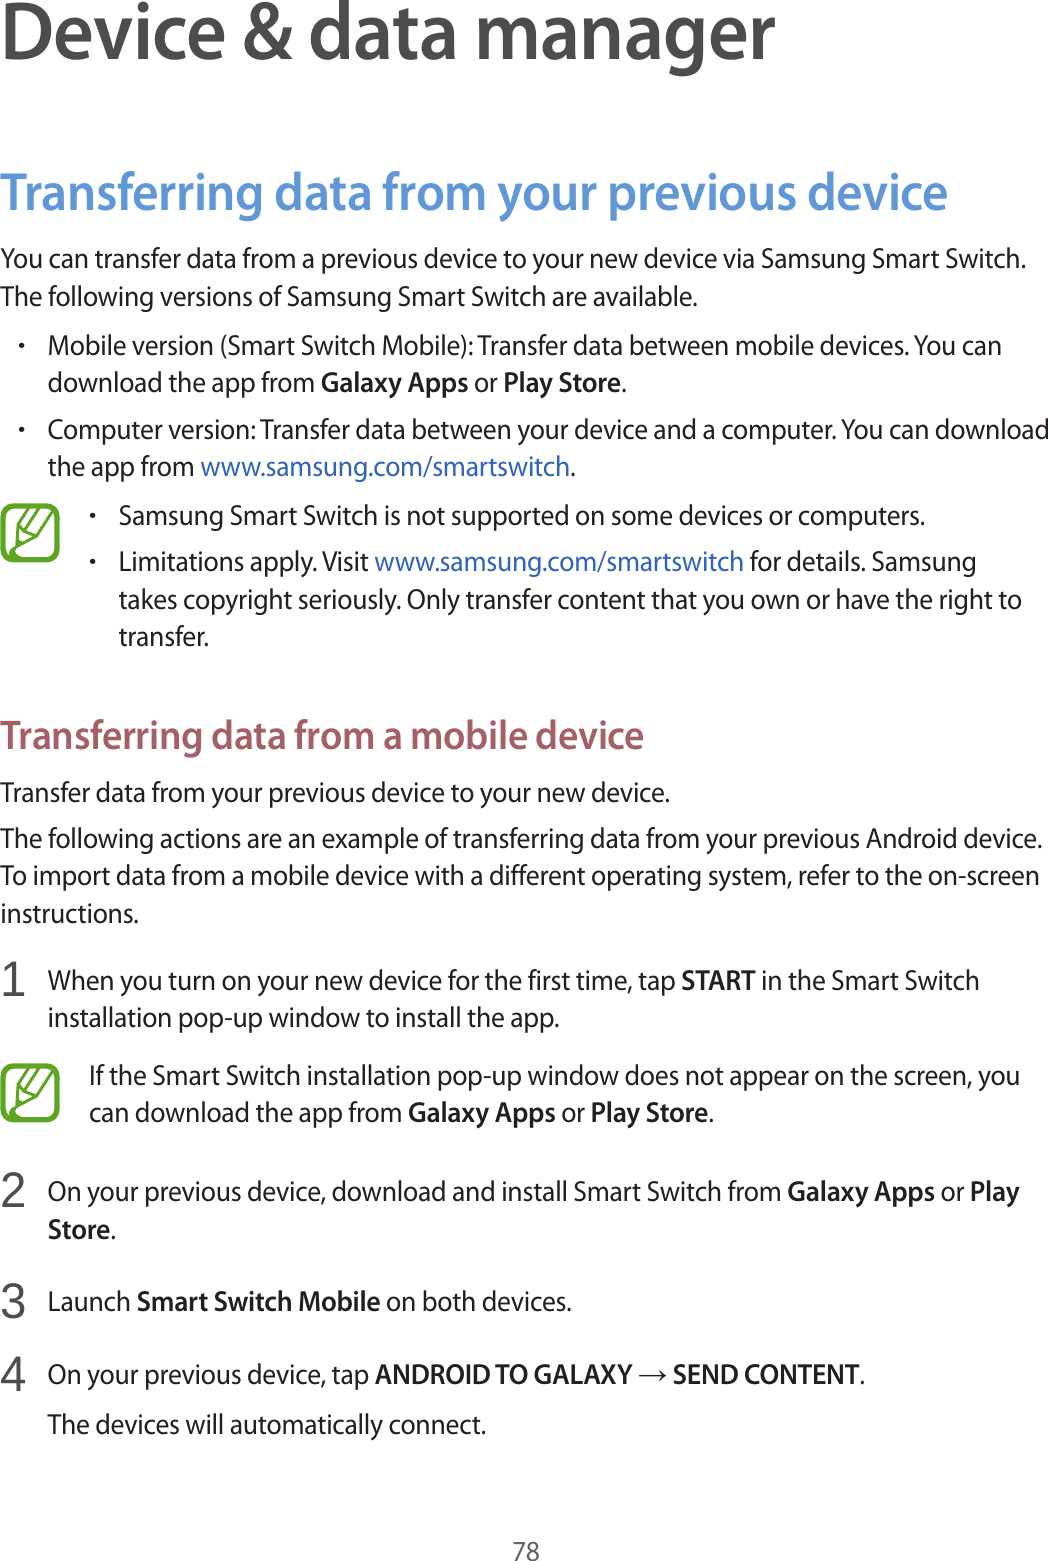 78Device &amp; data managerTransferring data from your previous deviceYou can transfer data from a previous device to your new device via Samsung Smart Switch. The following versions of Samsung Smart Switch are available.•Mobile version (Smart Switch Mobile): Transfer data between mobile devices. You can download the app from Galaxy Apps or Play Store.•Computer version: Transfer data between your device and a computer. You can download the app from www.samsung.com/smartswitch.•Samsung Smart Switch is not supported on some devices or computers.•Limitations apply. Visit www.samsung.com/smartswitch for details. Samsung takes copyright seriously. Only transfer content that you own or have the right to transfer.Transferring data from a mobile deviceTransfer data from your previous device to your new device.The following actions are an example of transferring data from your previous Android device. To import data from a mobile device with a different operating system, refer to the on-screen instructions.1  When you turn on your new device for the first time, tap START in the Smart Switch installation pop-up window to install the app.If the Smart Switch installation pop-up window does not appear on the screen, you can download the app from Galaxy Apps or Play Store.2  On your previous device, download and install Smart Switch from Galaxy Apps or Play Store.3  Launch Smart Switch Mobile on both devices.4  On your previous device, tap ANDROID TO GALAXY → SEND CONTENT.The devices will automatically connect.